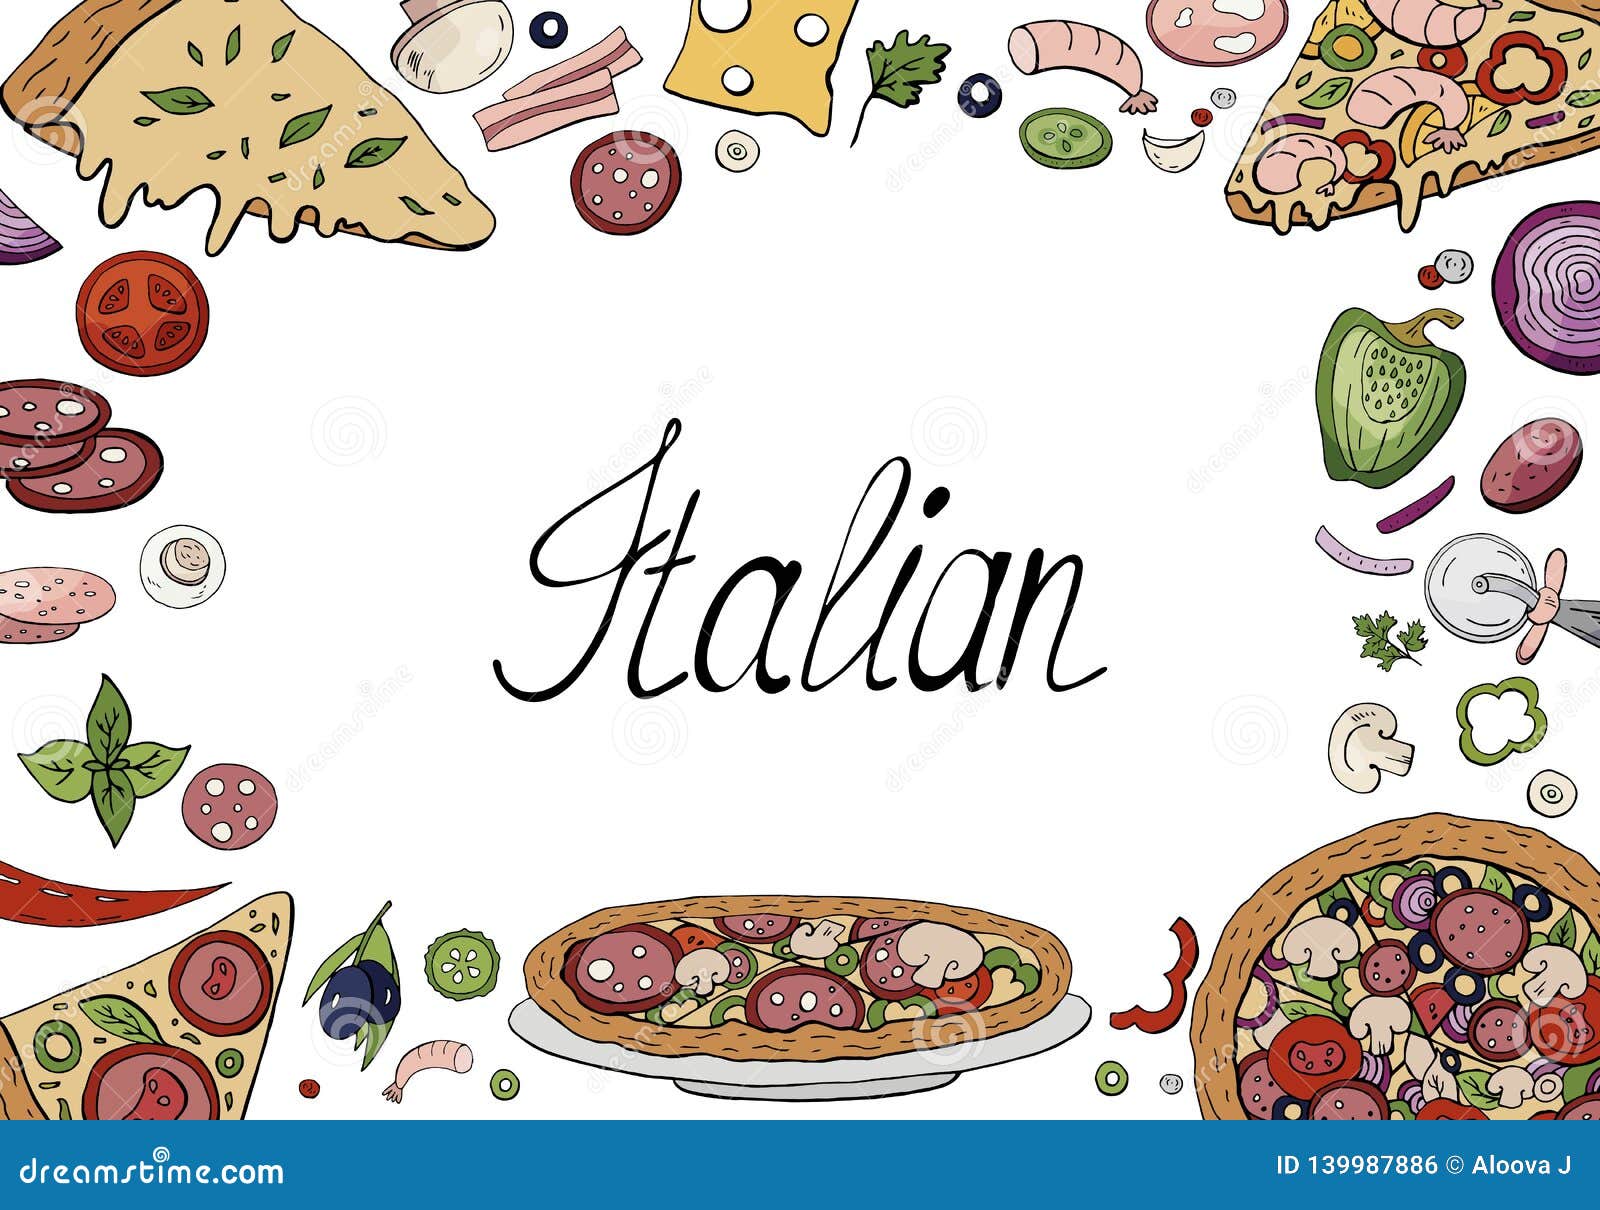 Hand Drawn Doodle Background with Italian Food Elements Stock ...